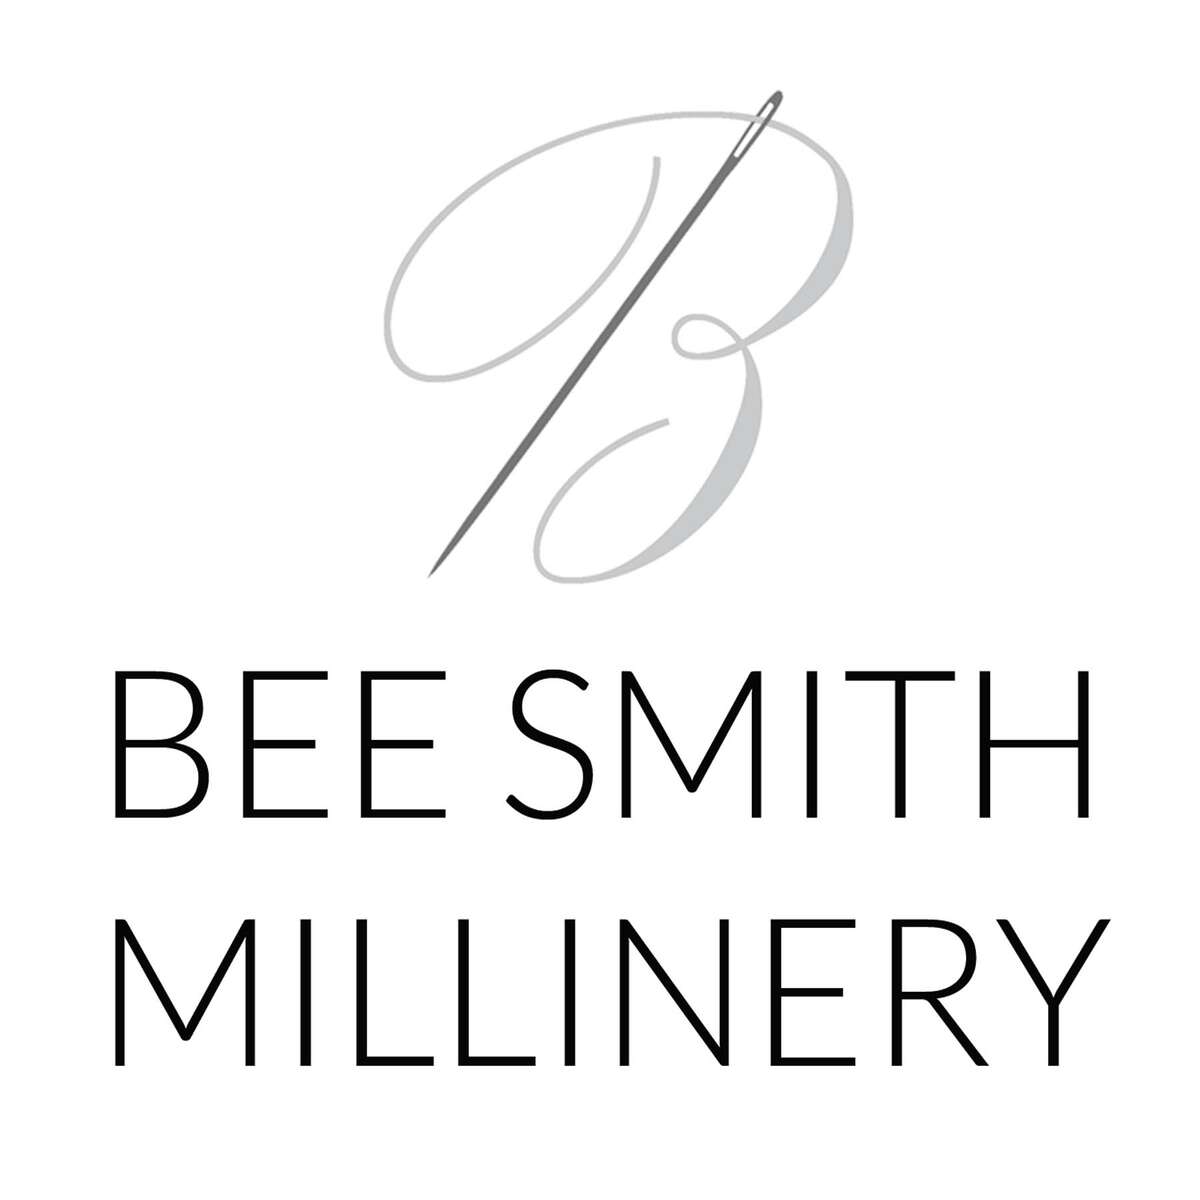 Bee Smith Millinery